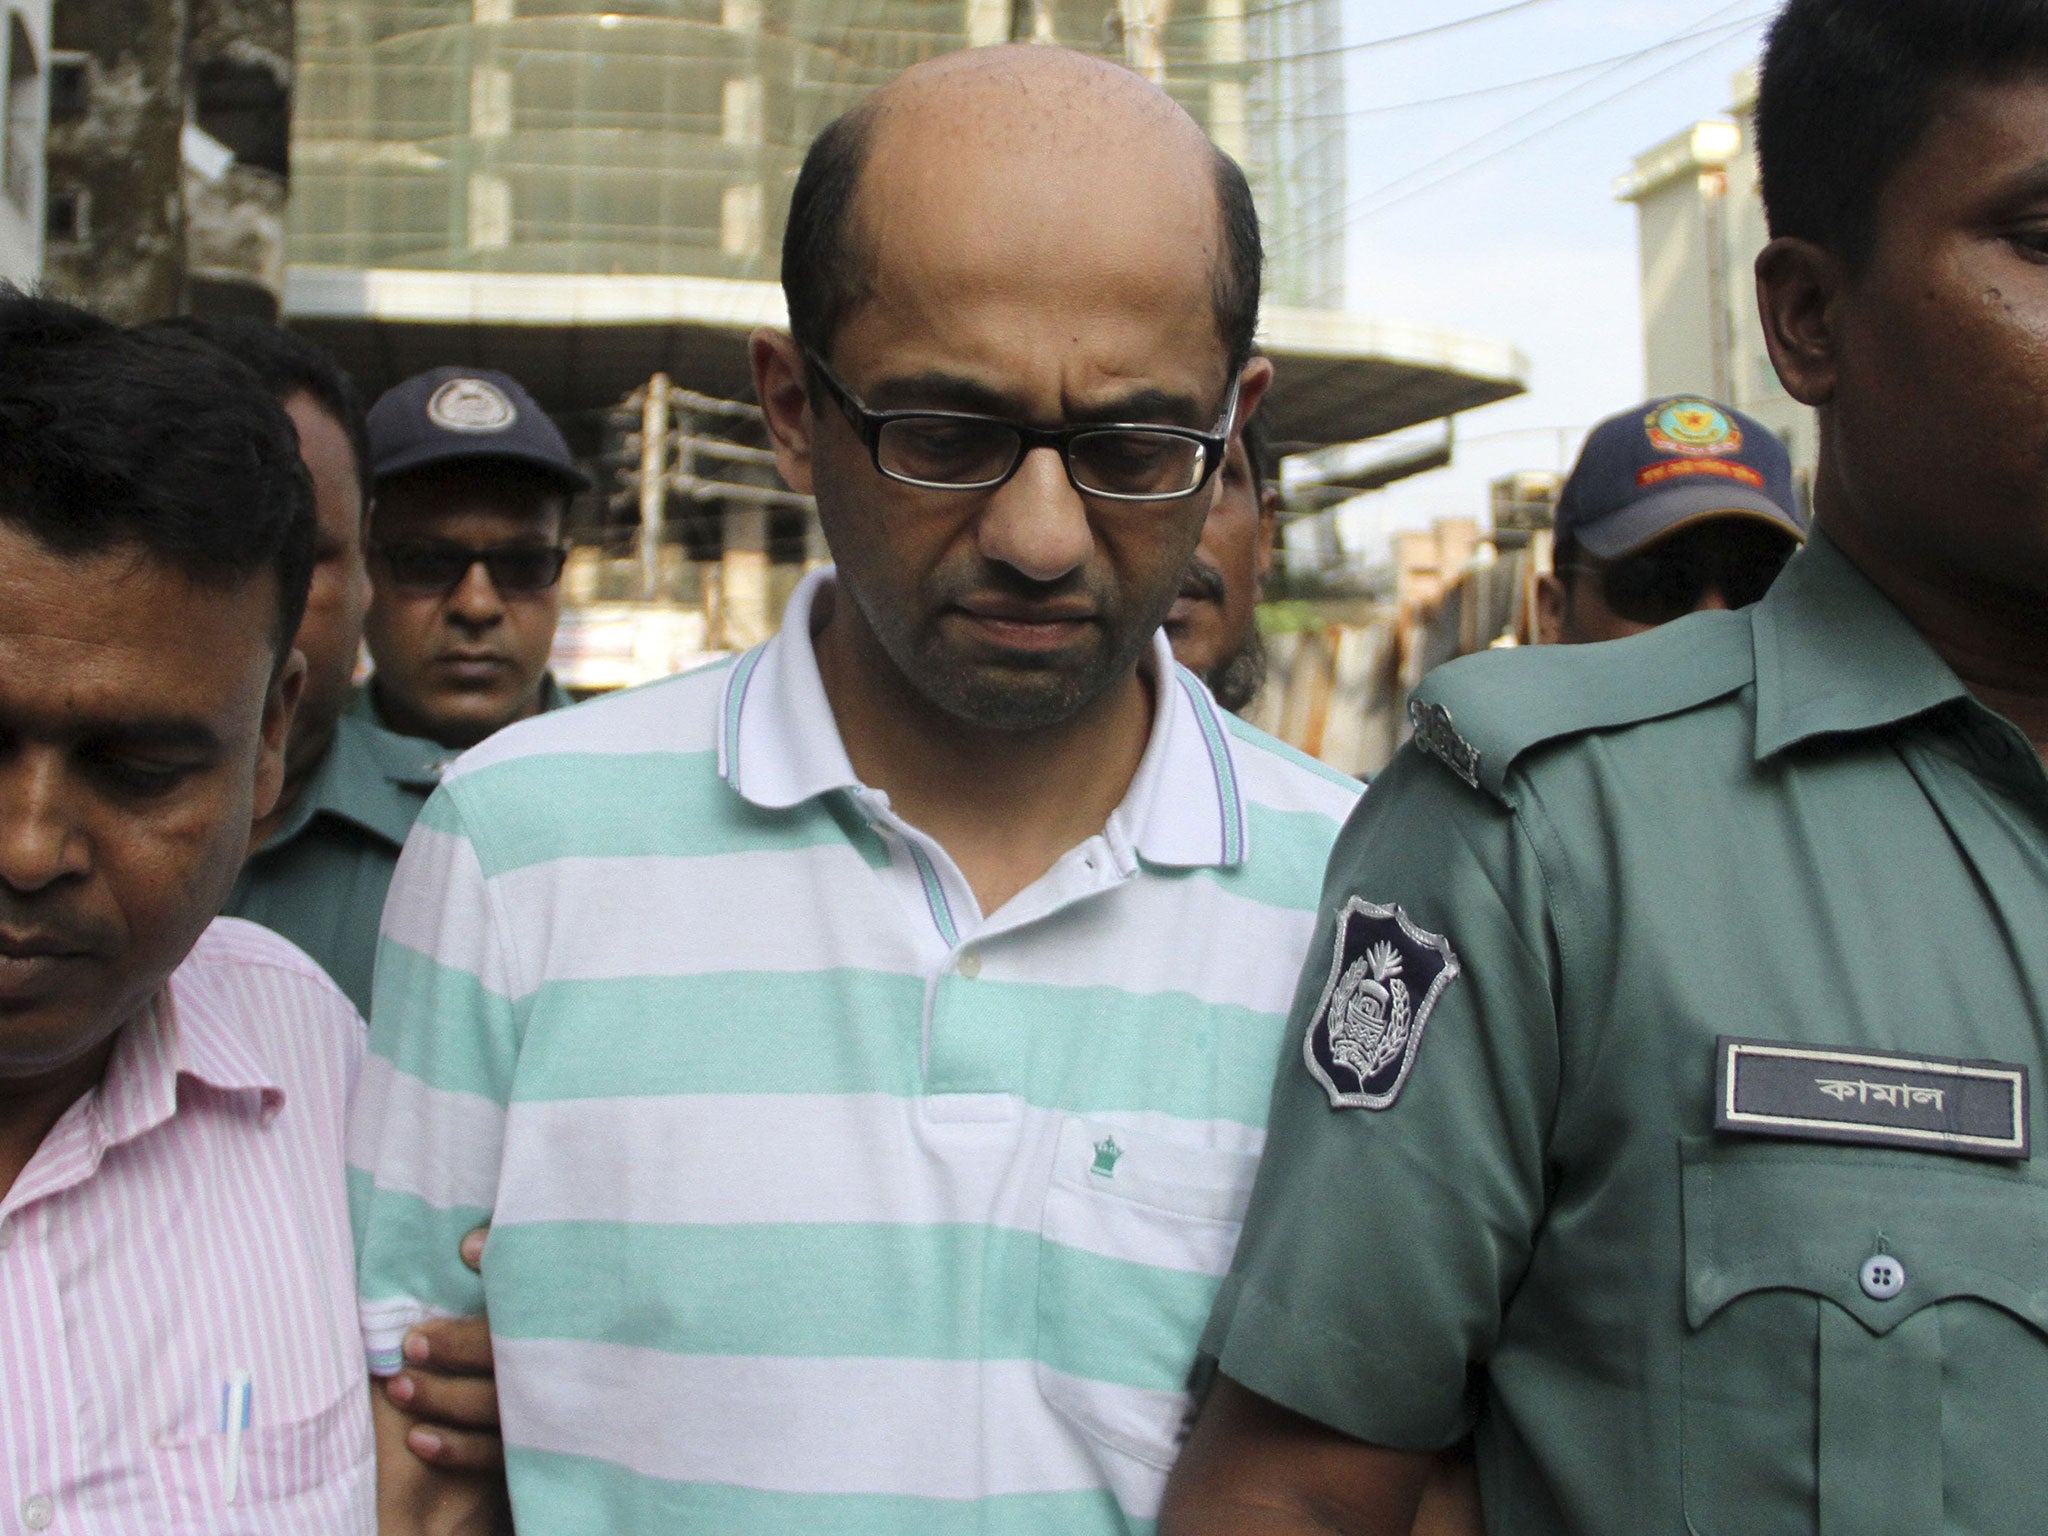 Hasnat Karim was jailed without charge for more than two years